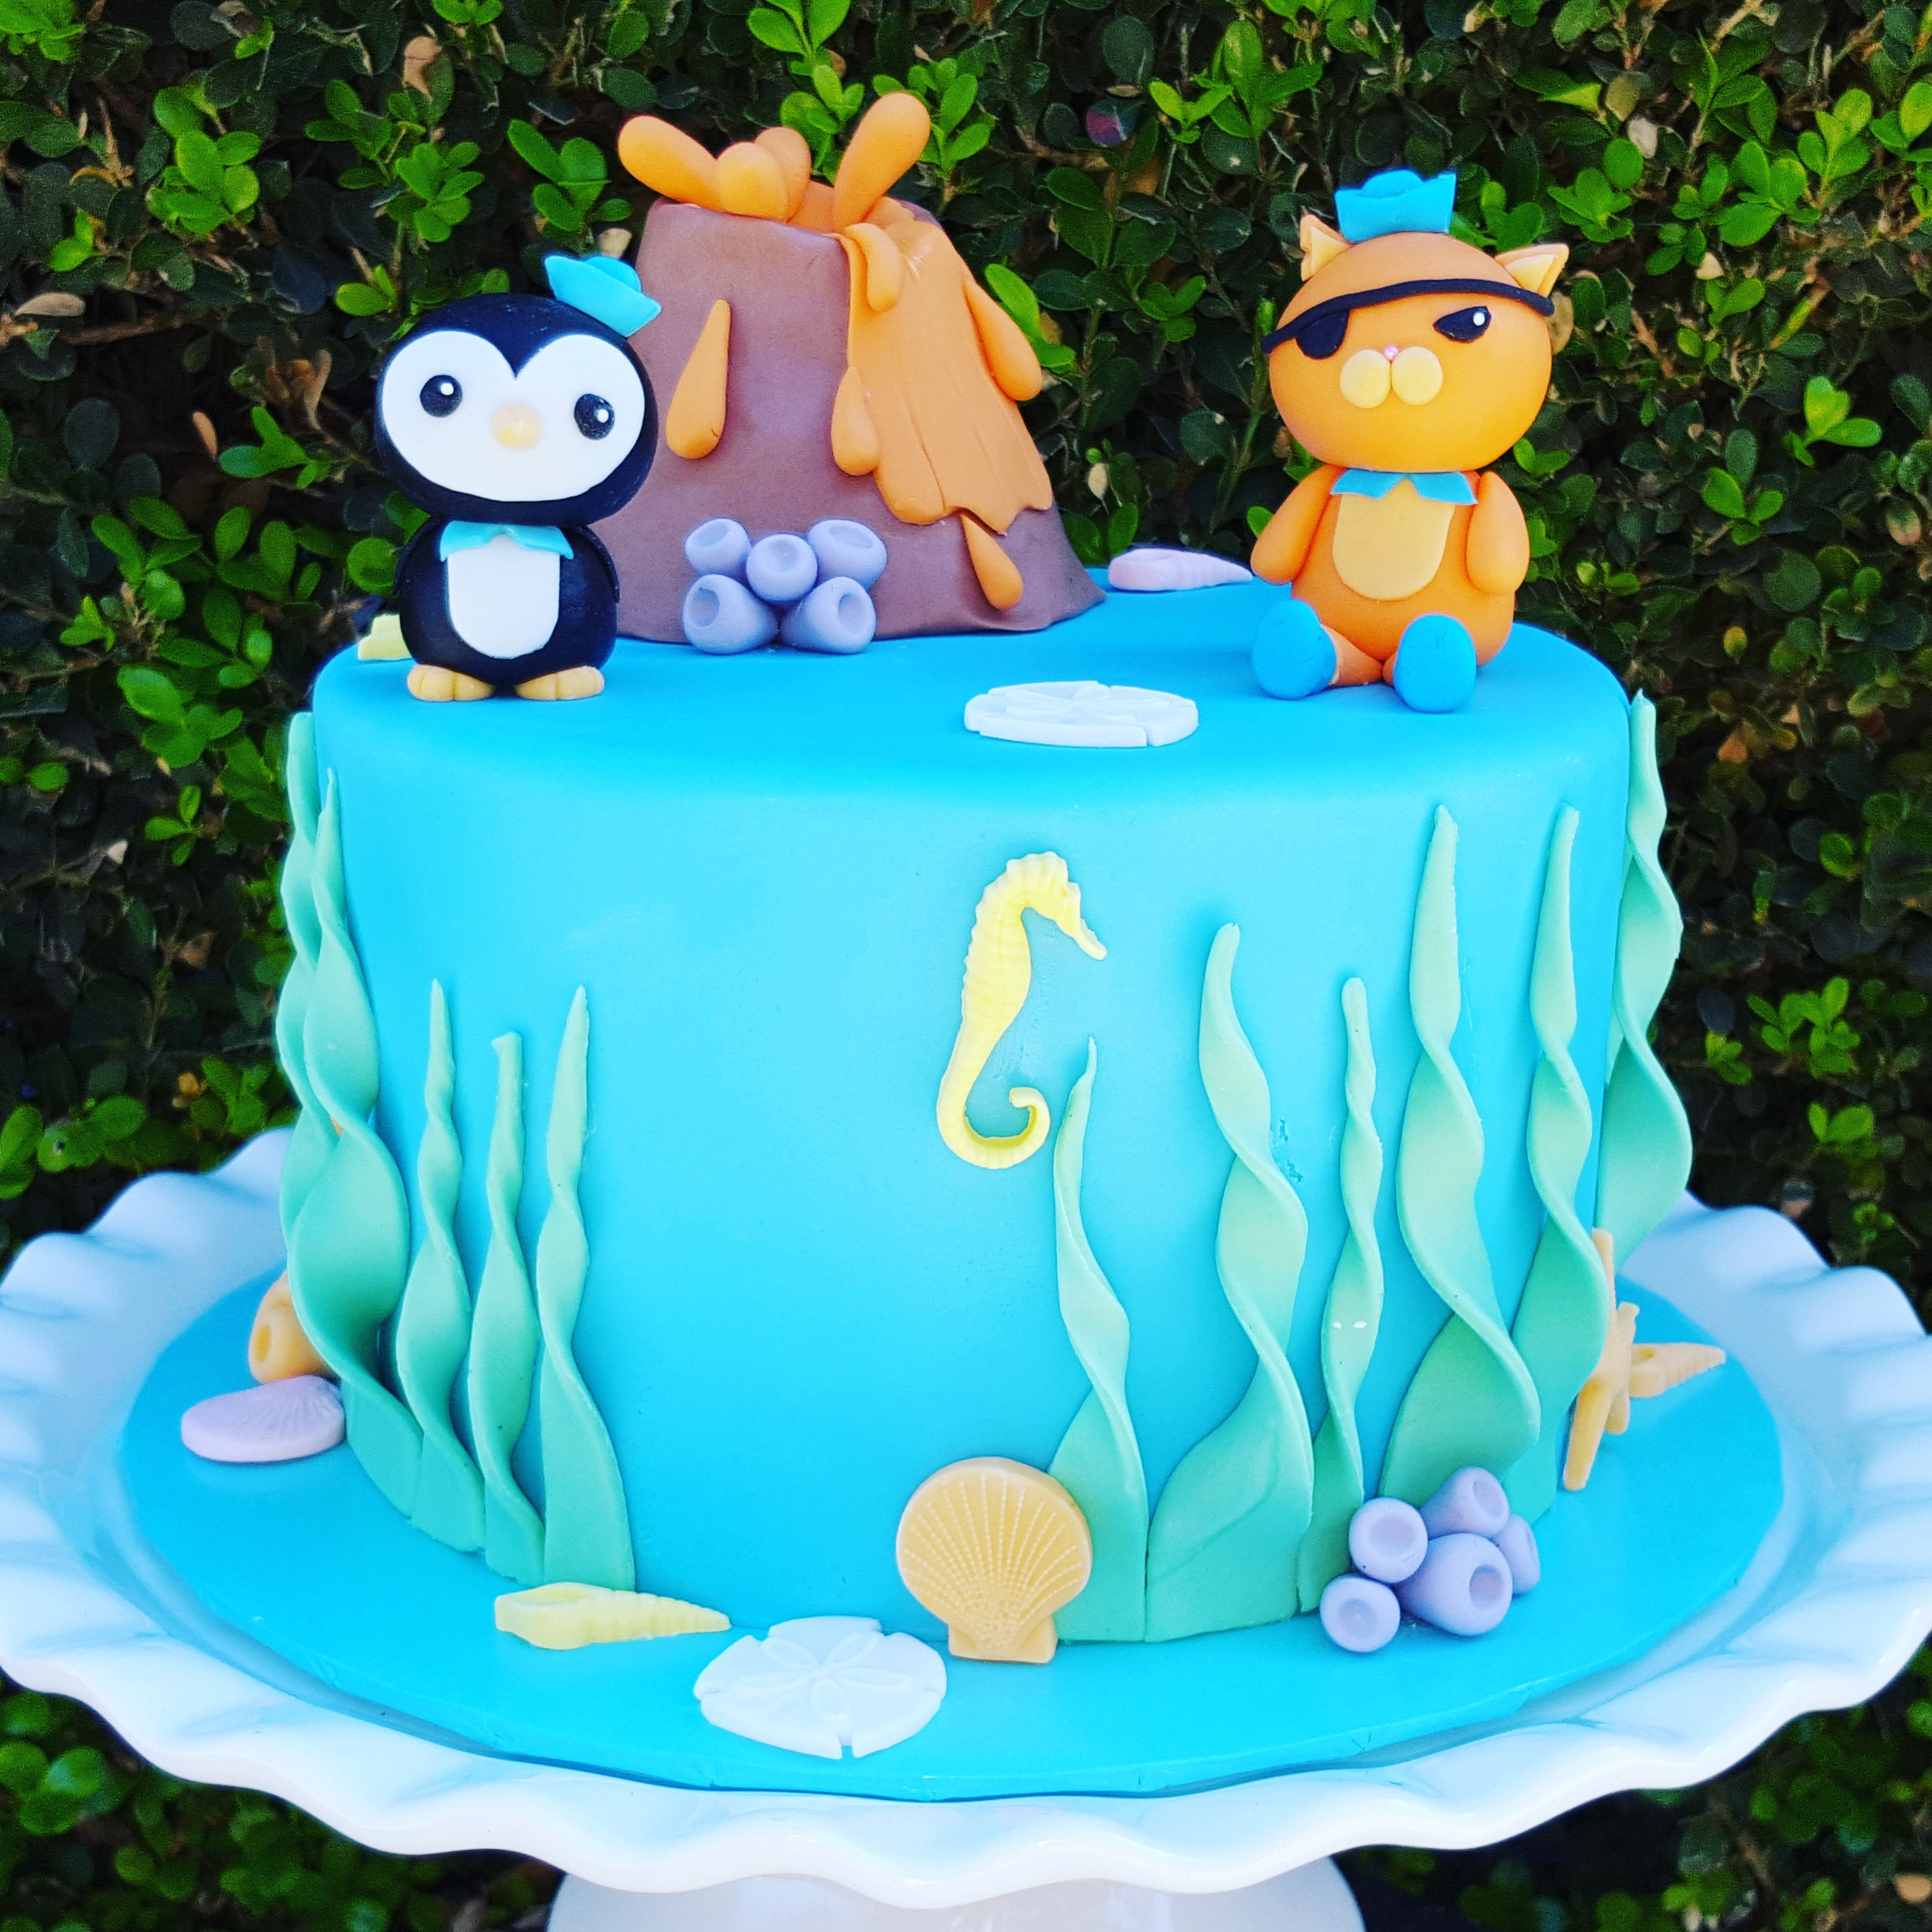 Kids Party Cakes
 Kids Birthday Cakes by Paper Street Cake in Orange County CA